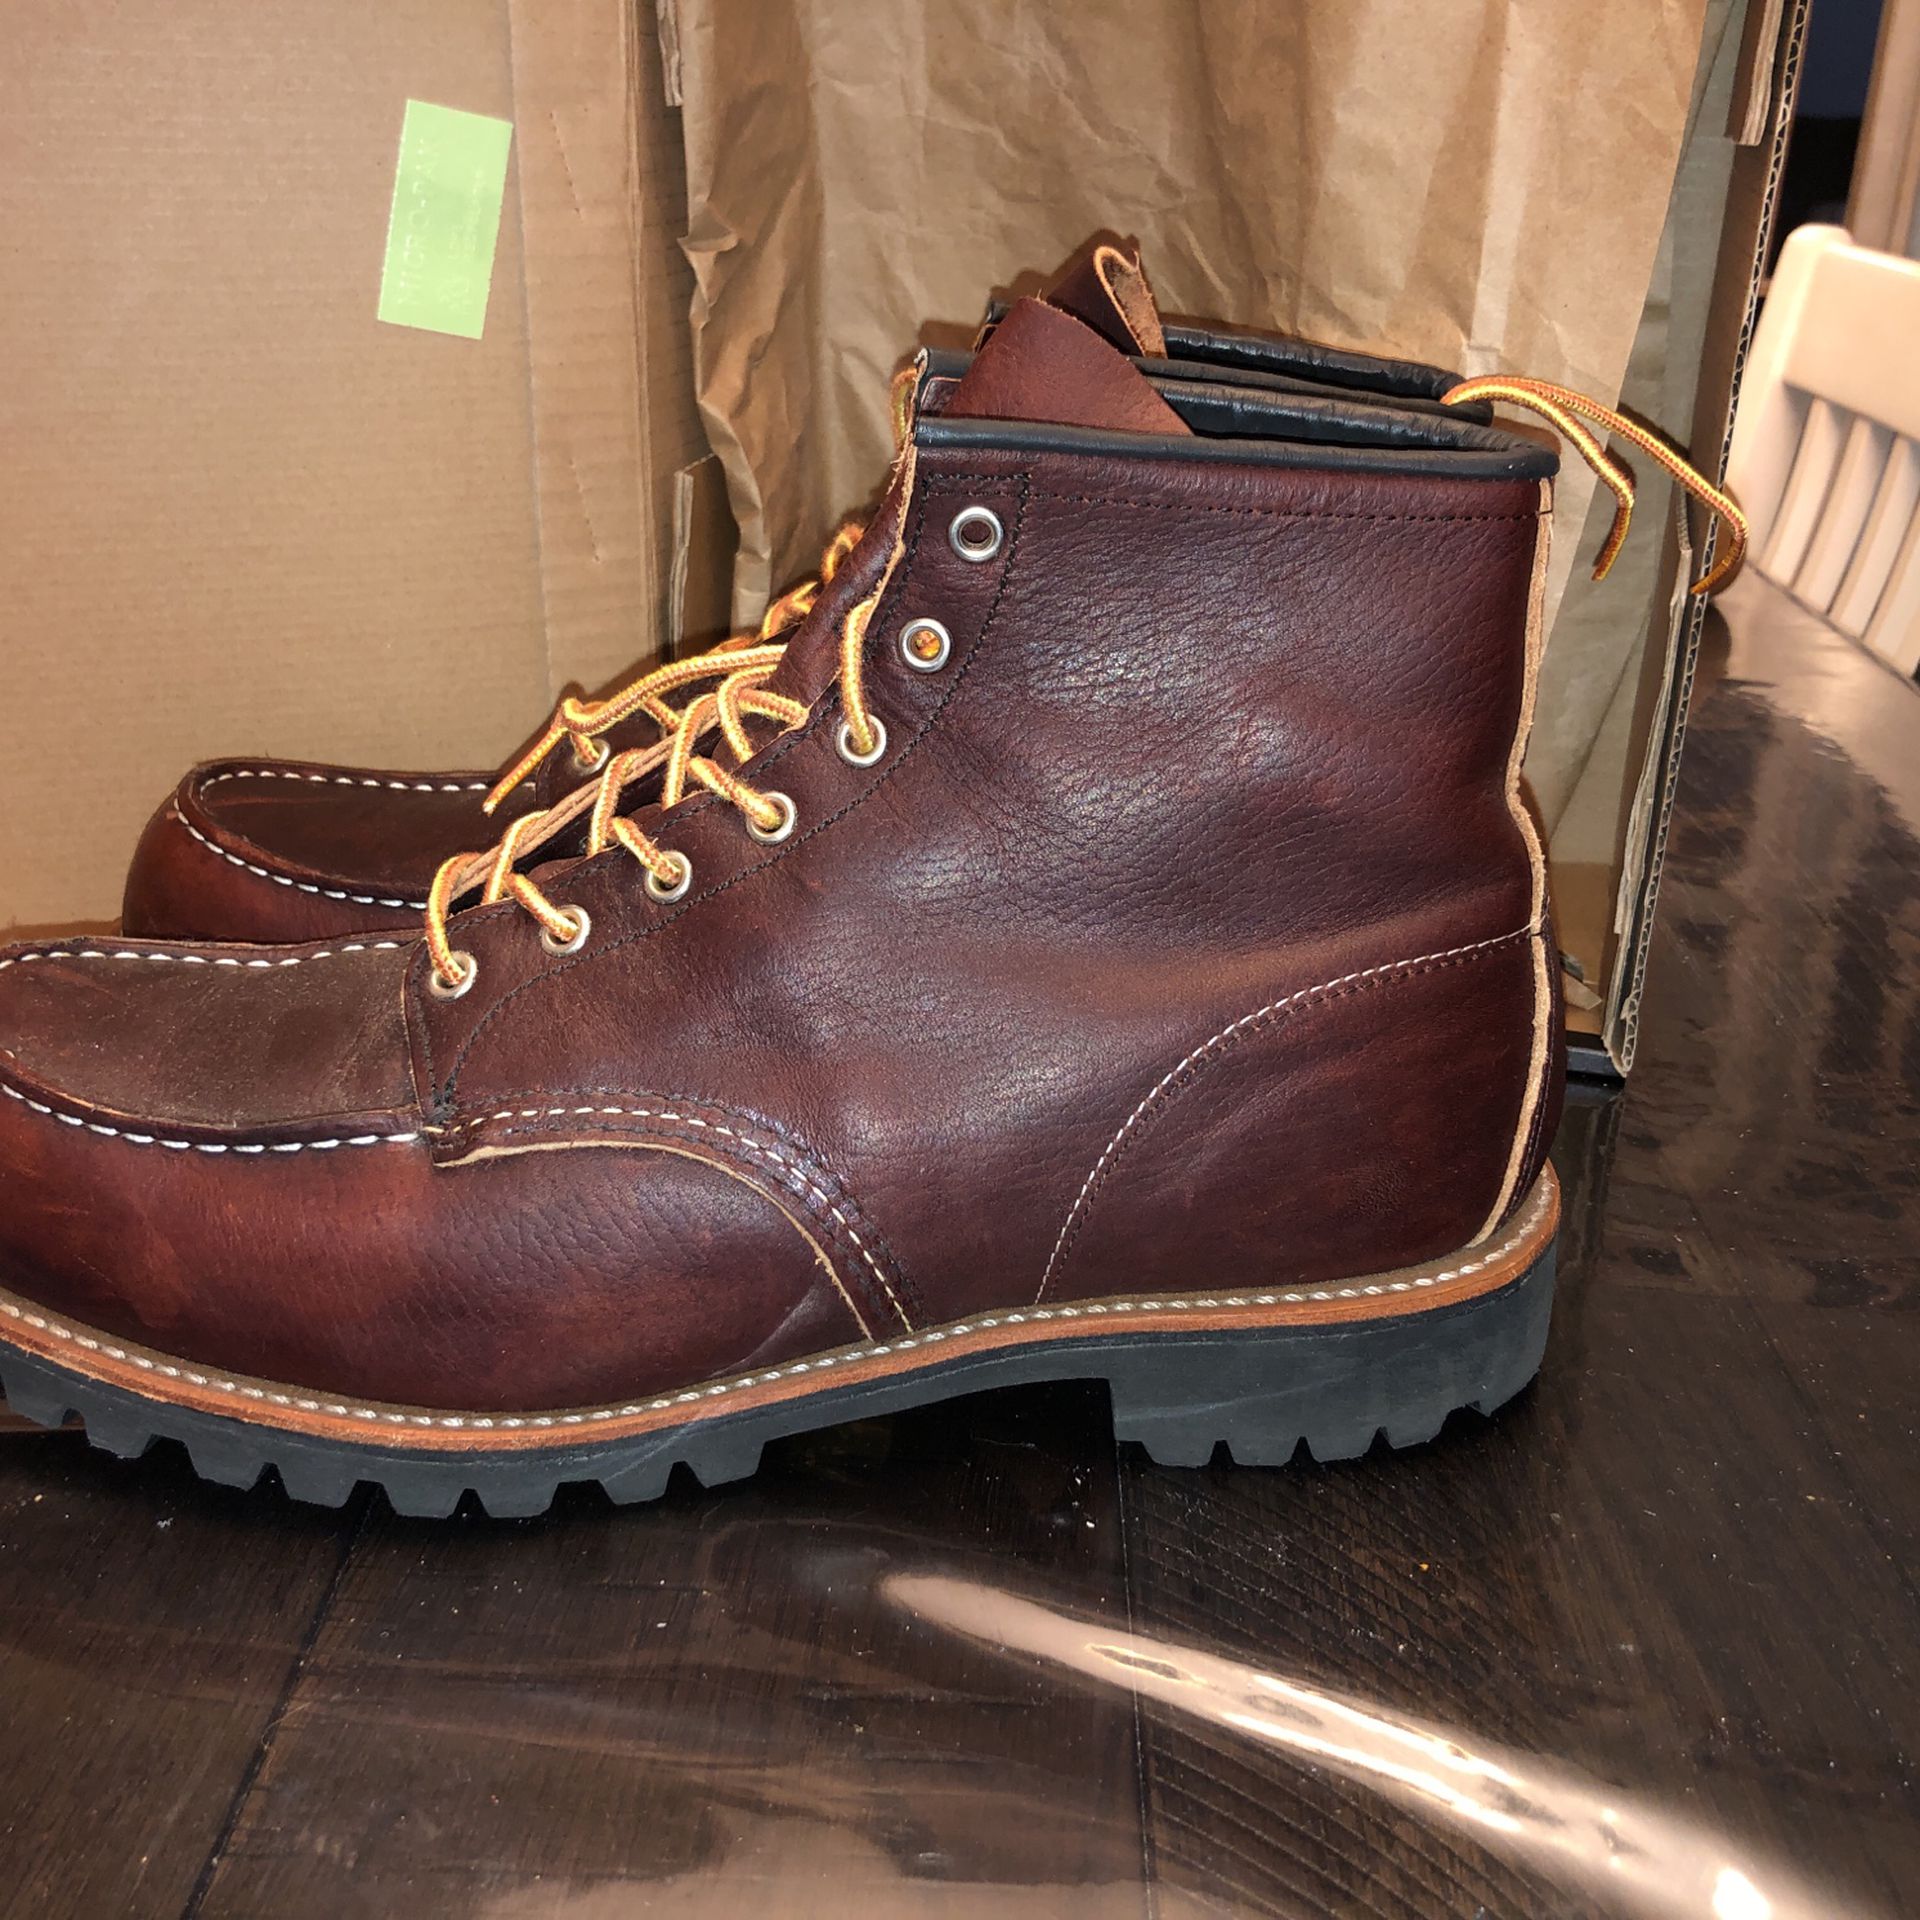 Red Wings  Burgundy boot Leather 8146 Size 12